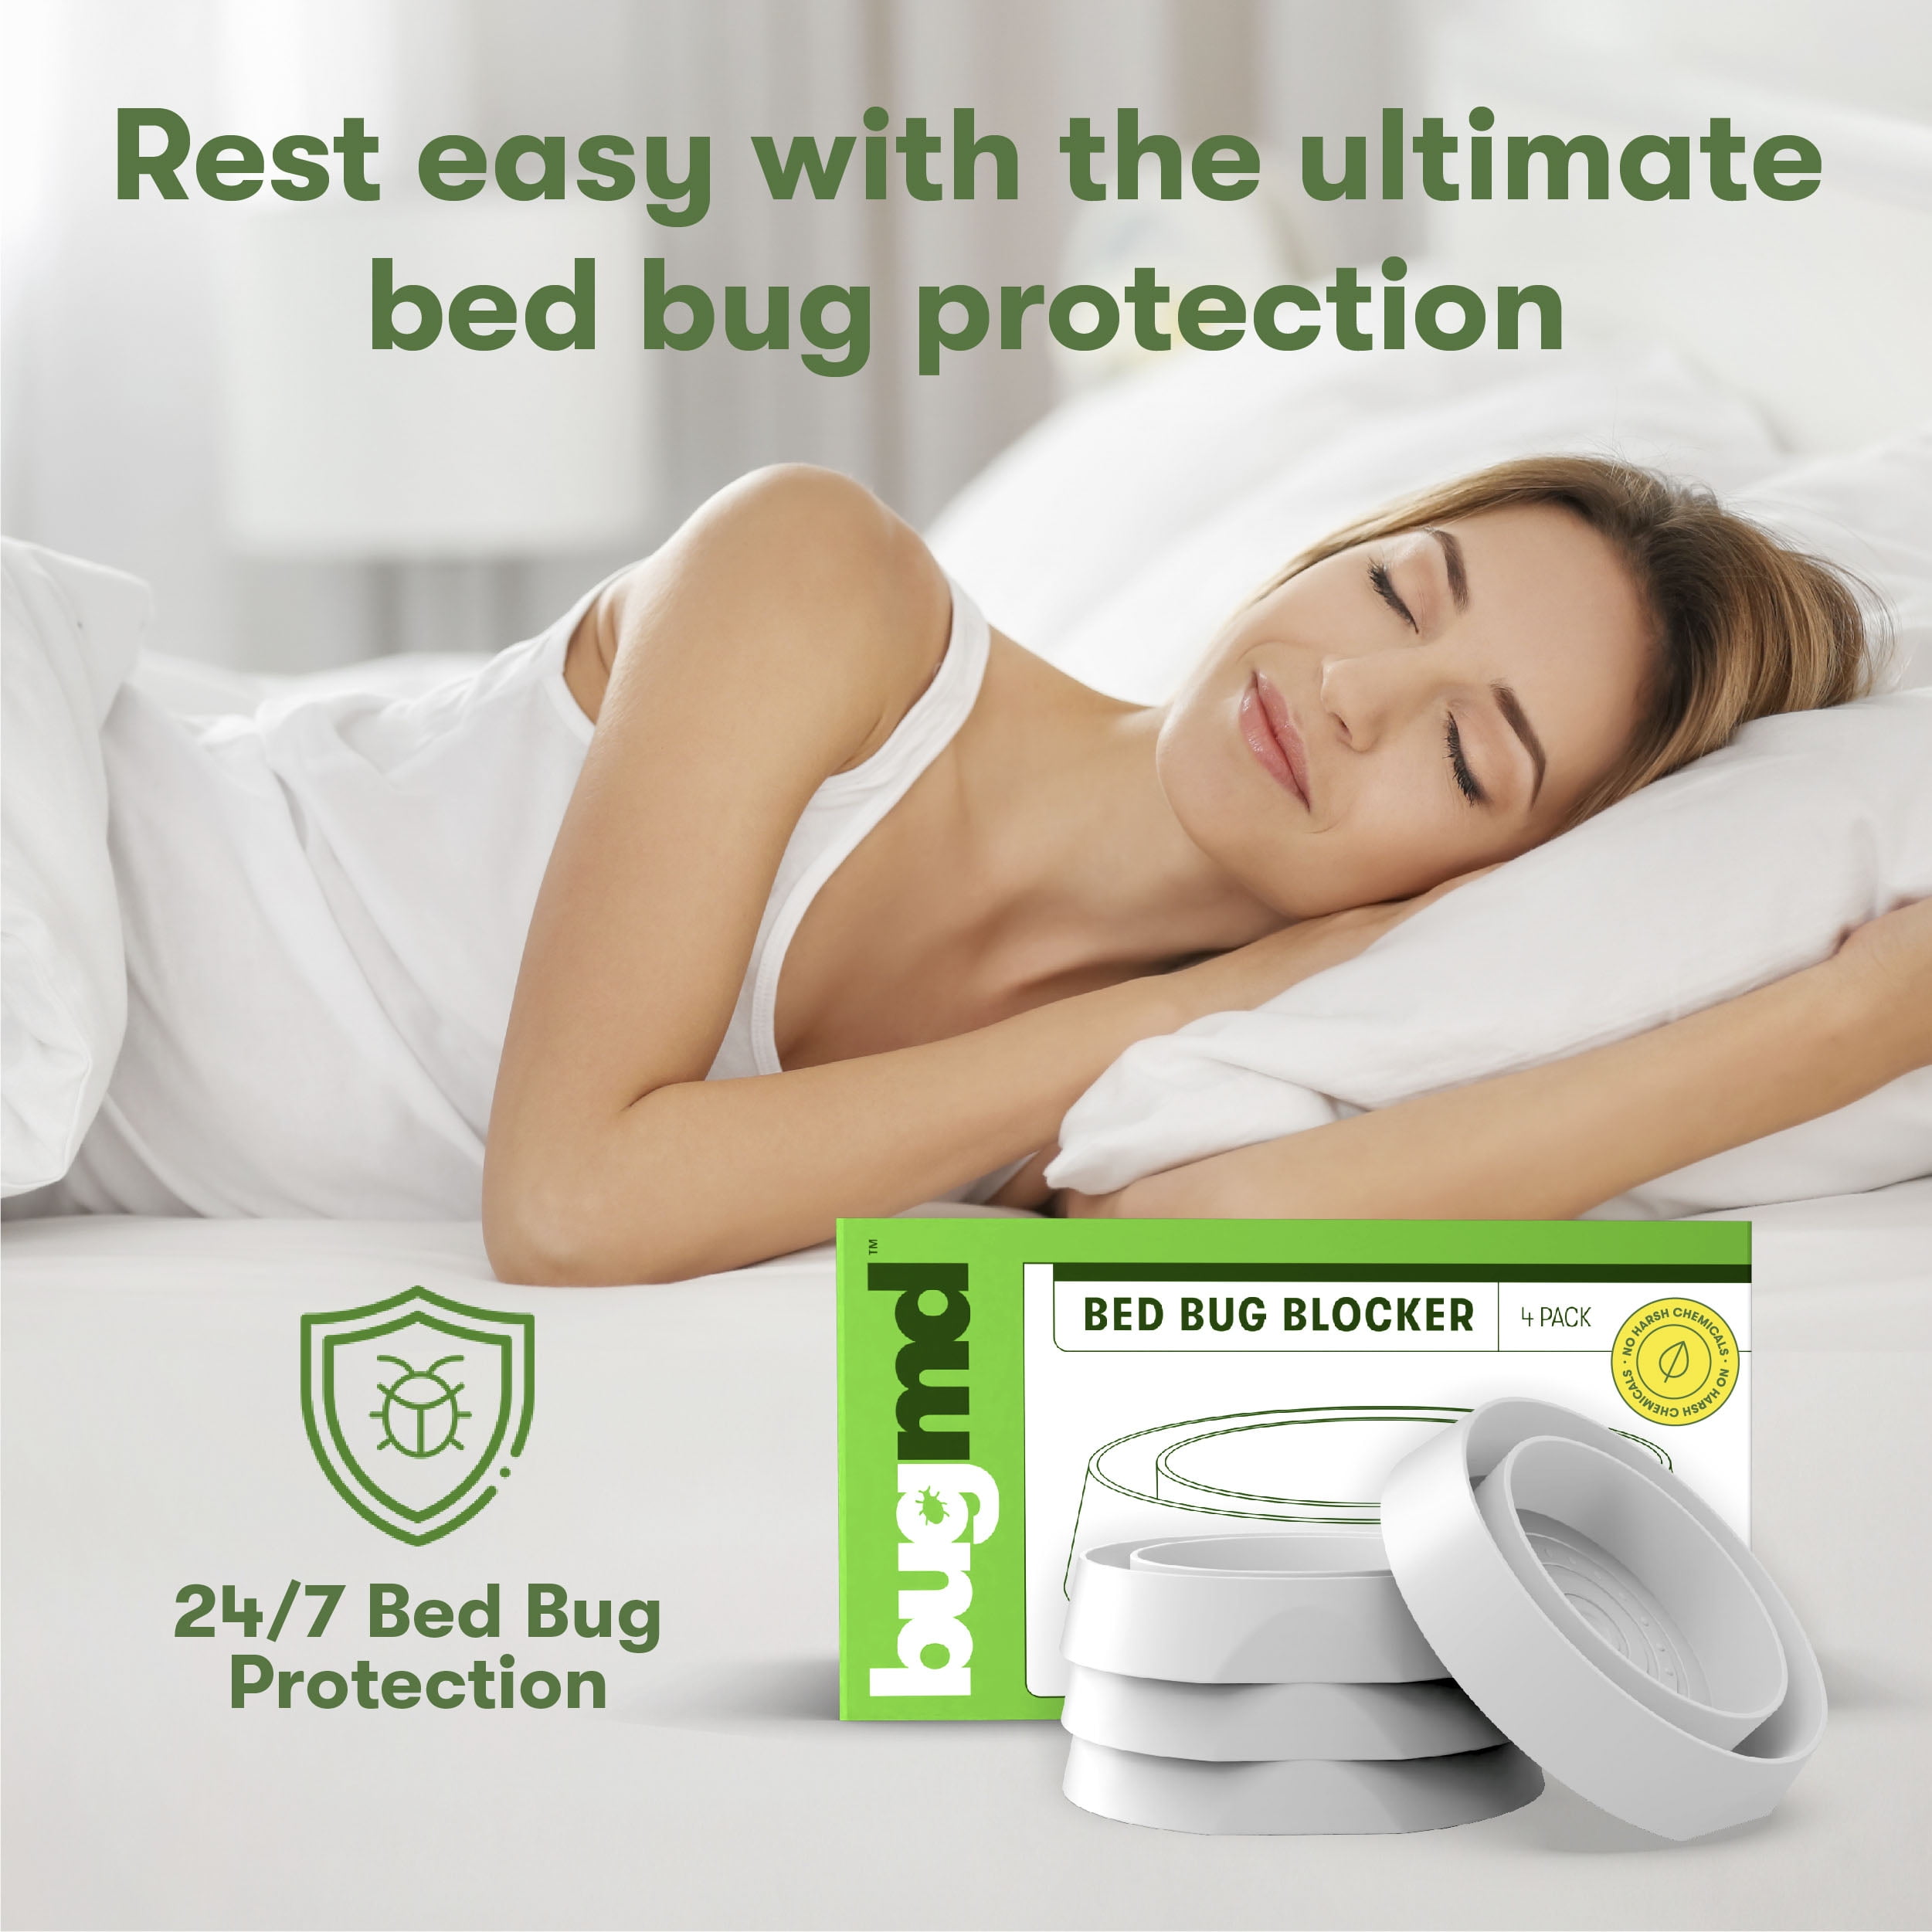 The Bed Bug Traps – bugmd